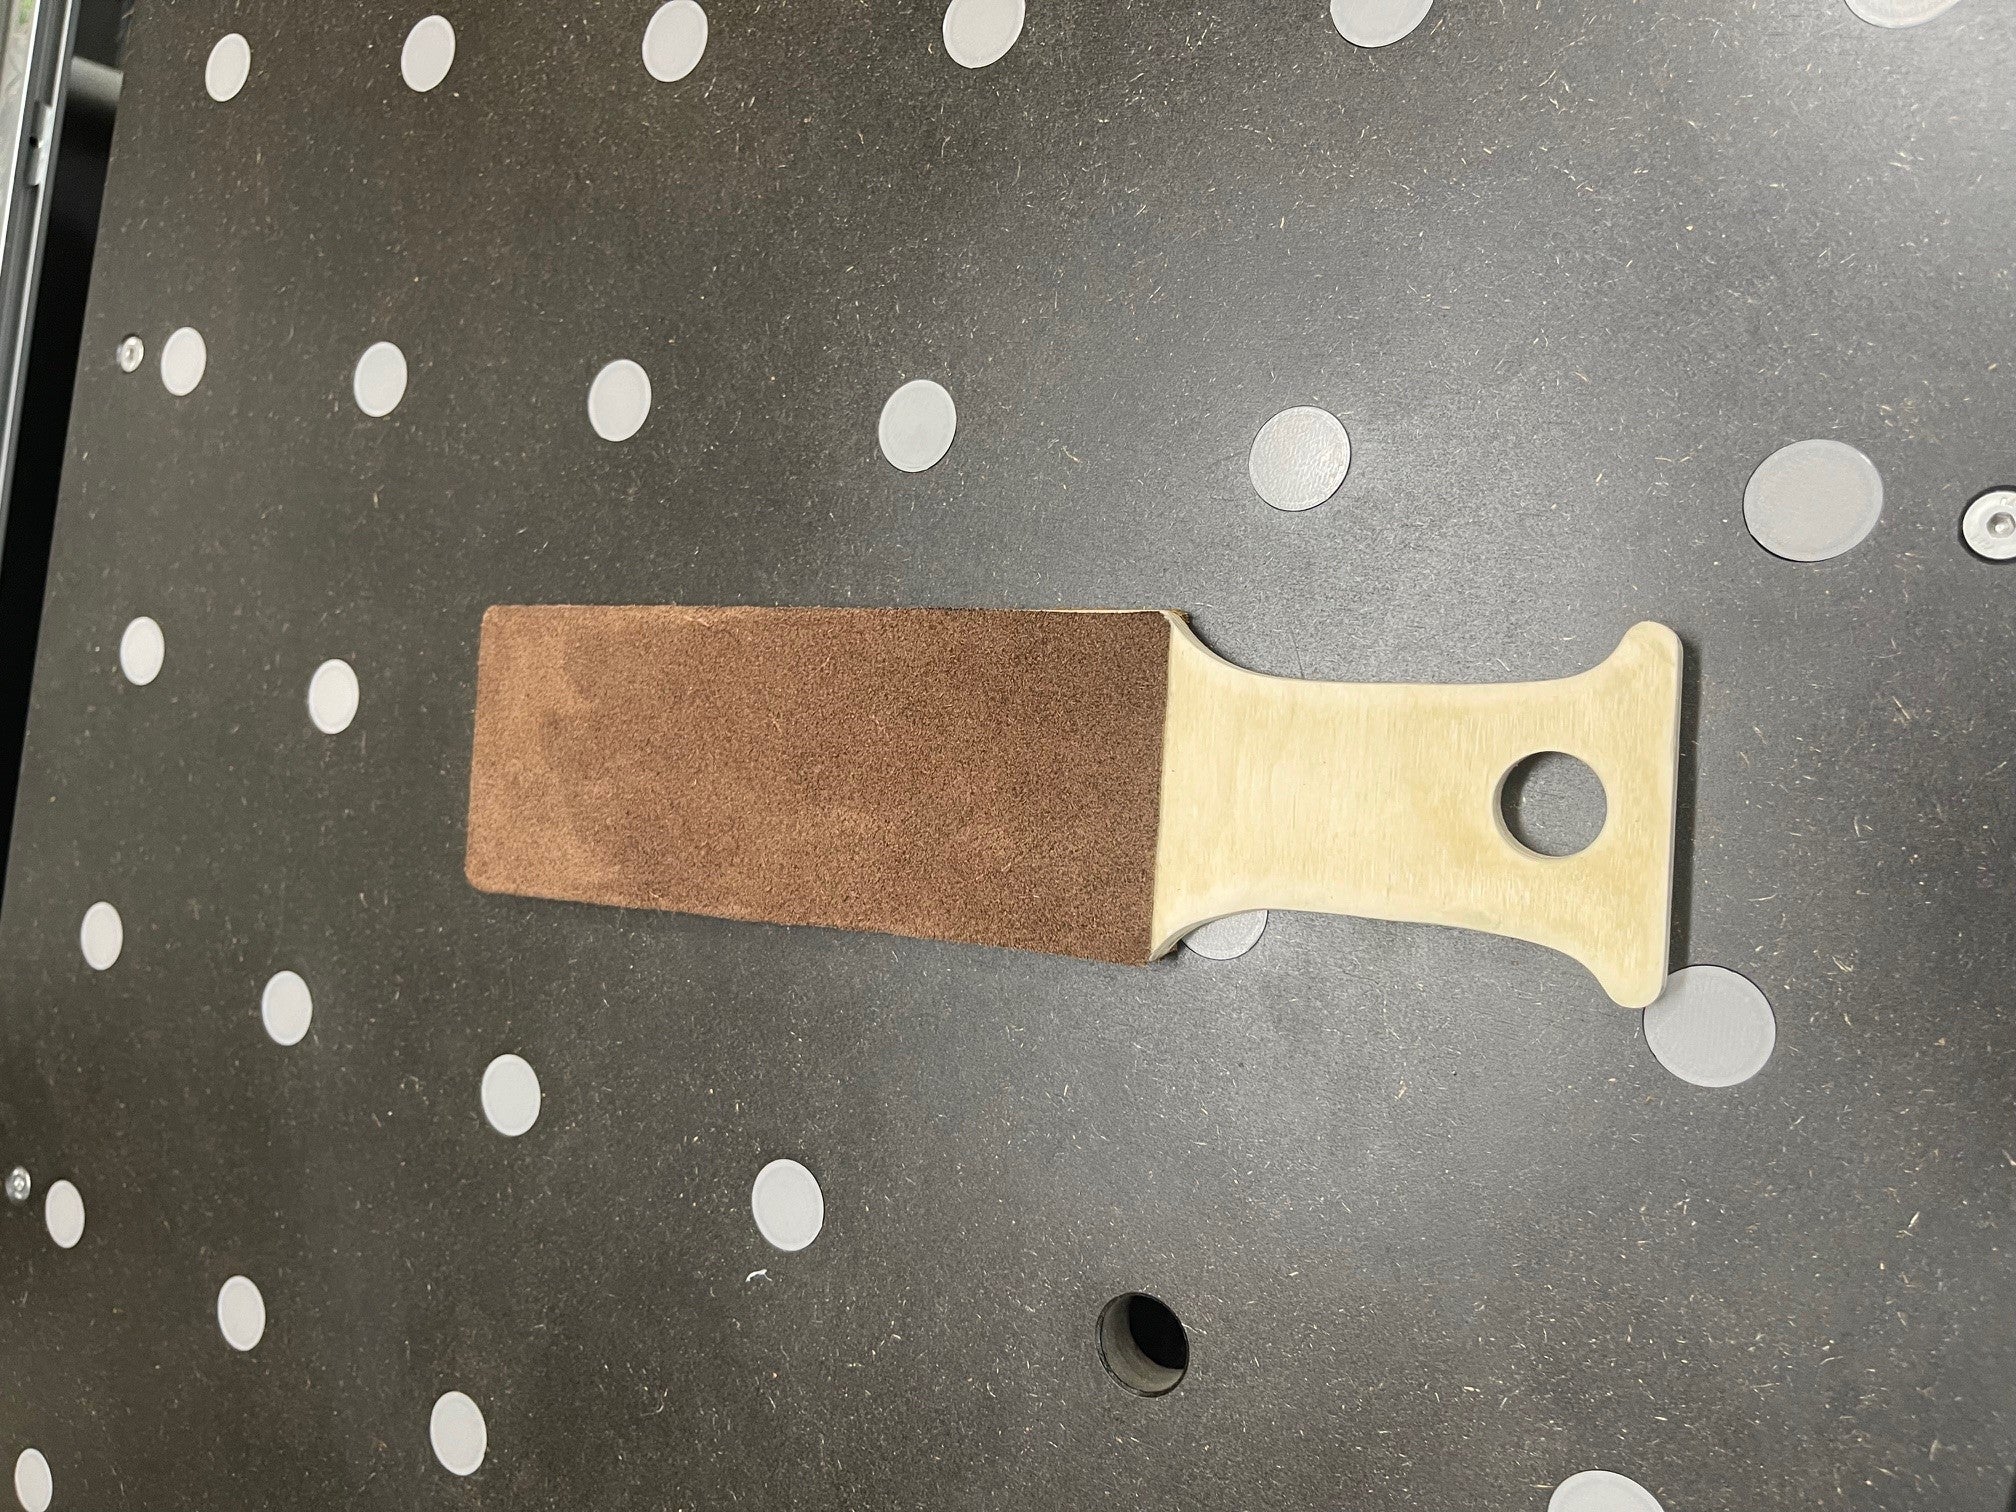 ToolShark Genuine Leather Strop Double Sided